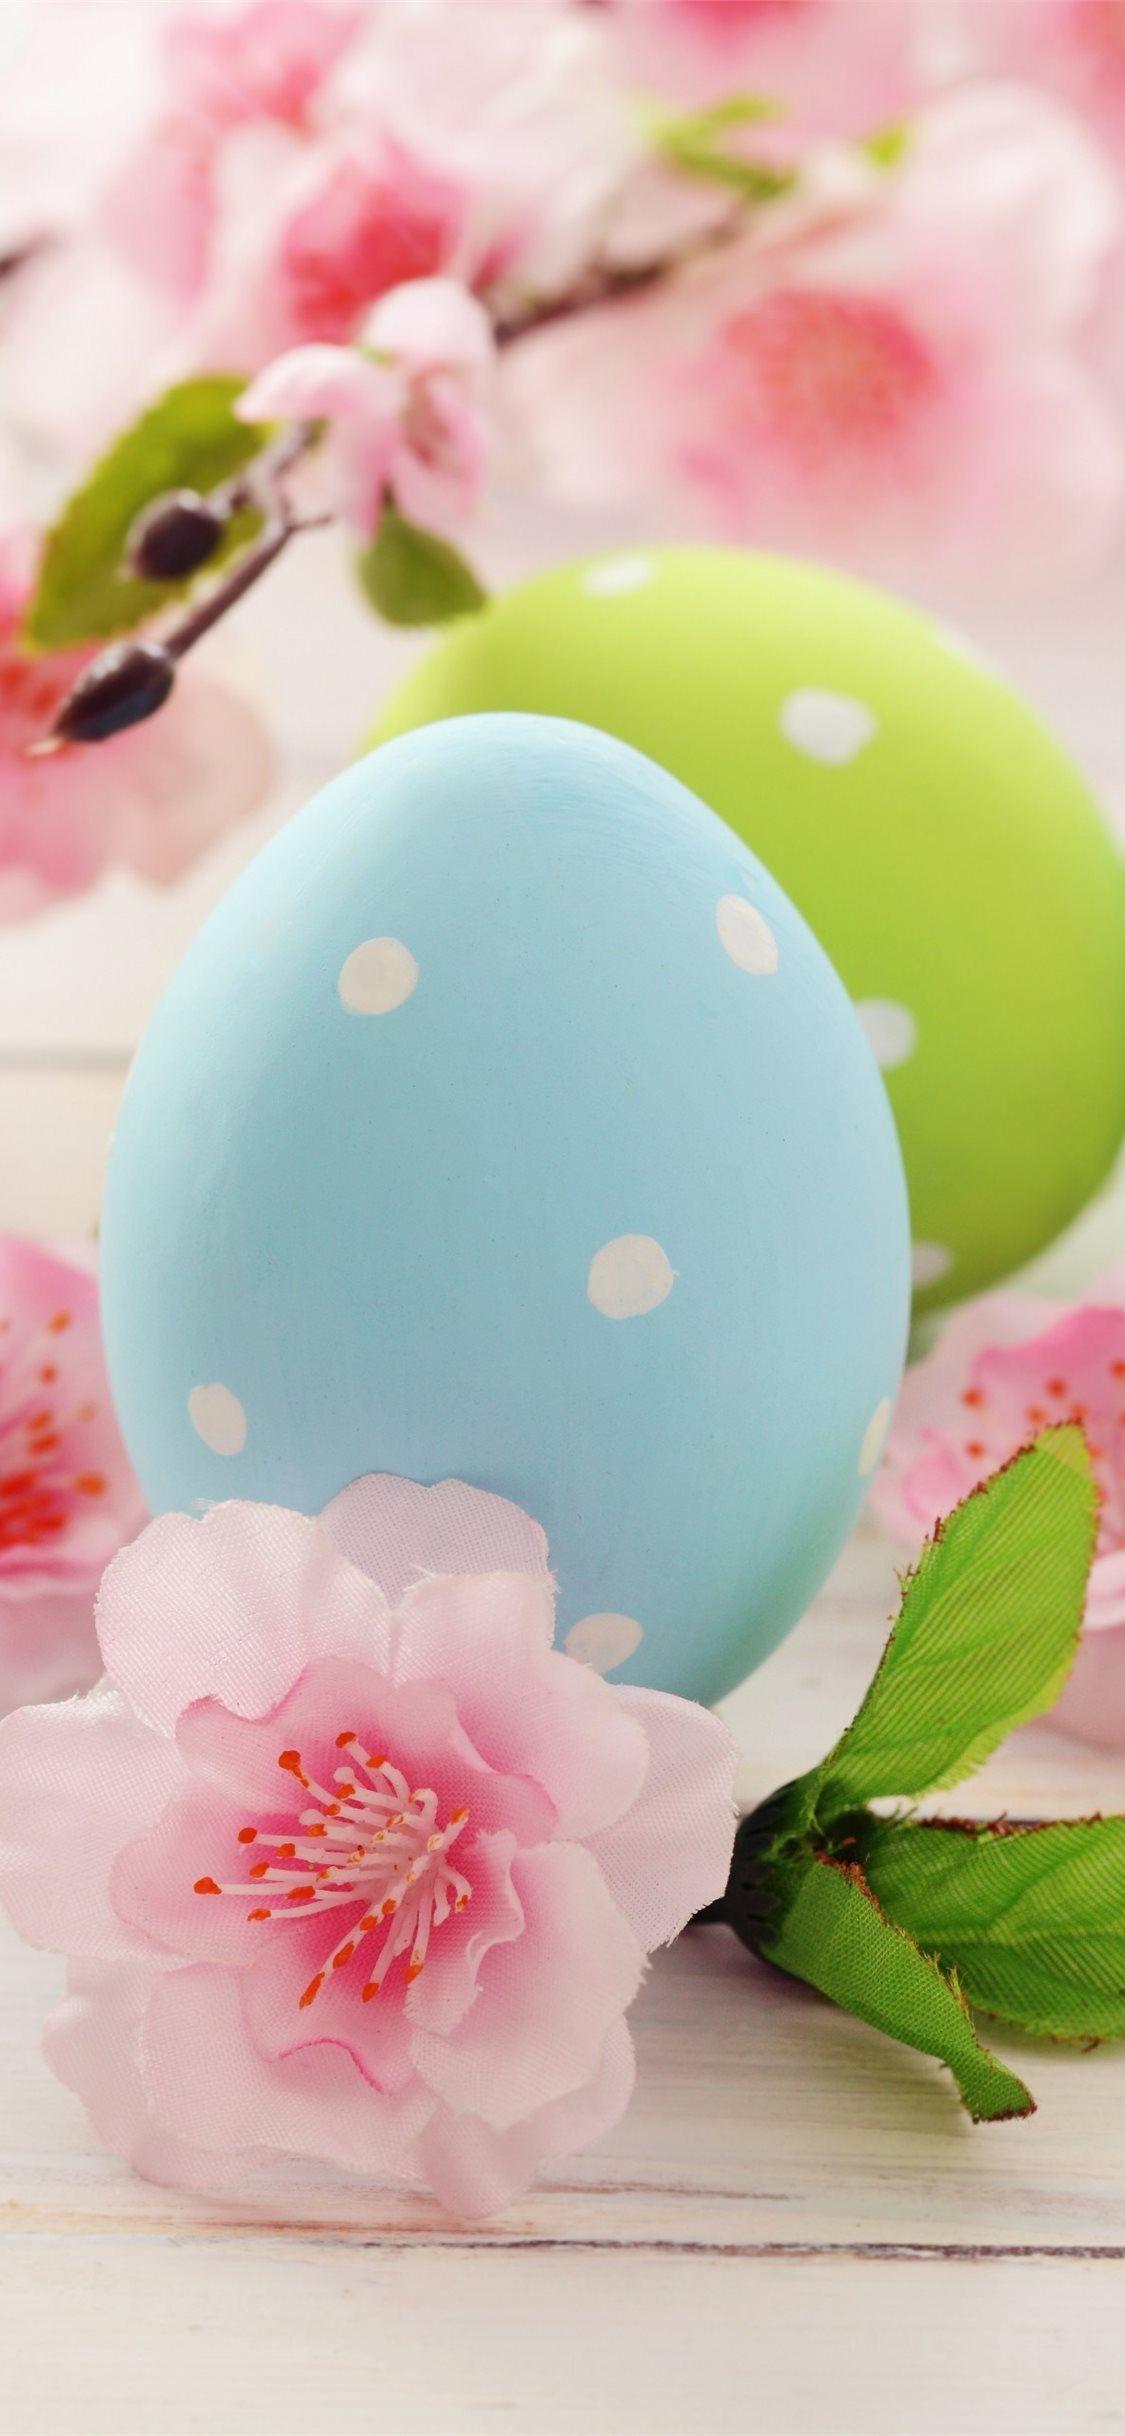 Wallpaper ID 409359  Holiday Easter Phone Wallpaper Feather Flower  Easter Egg 1080x1920 free download